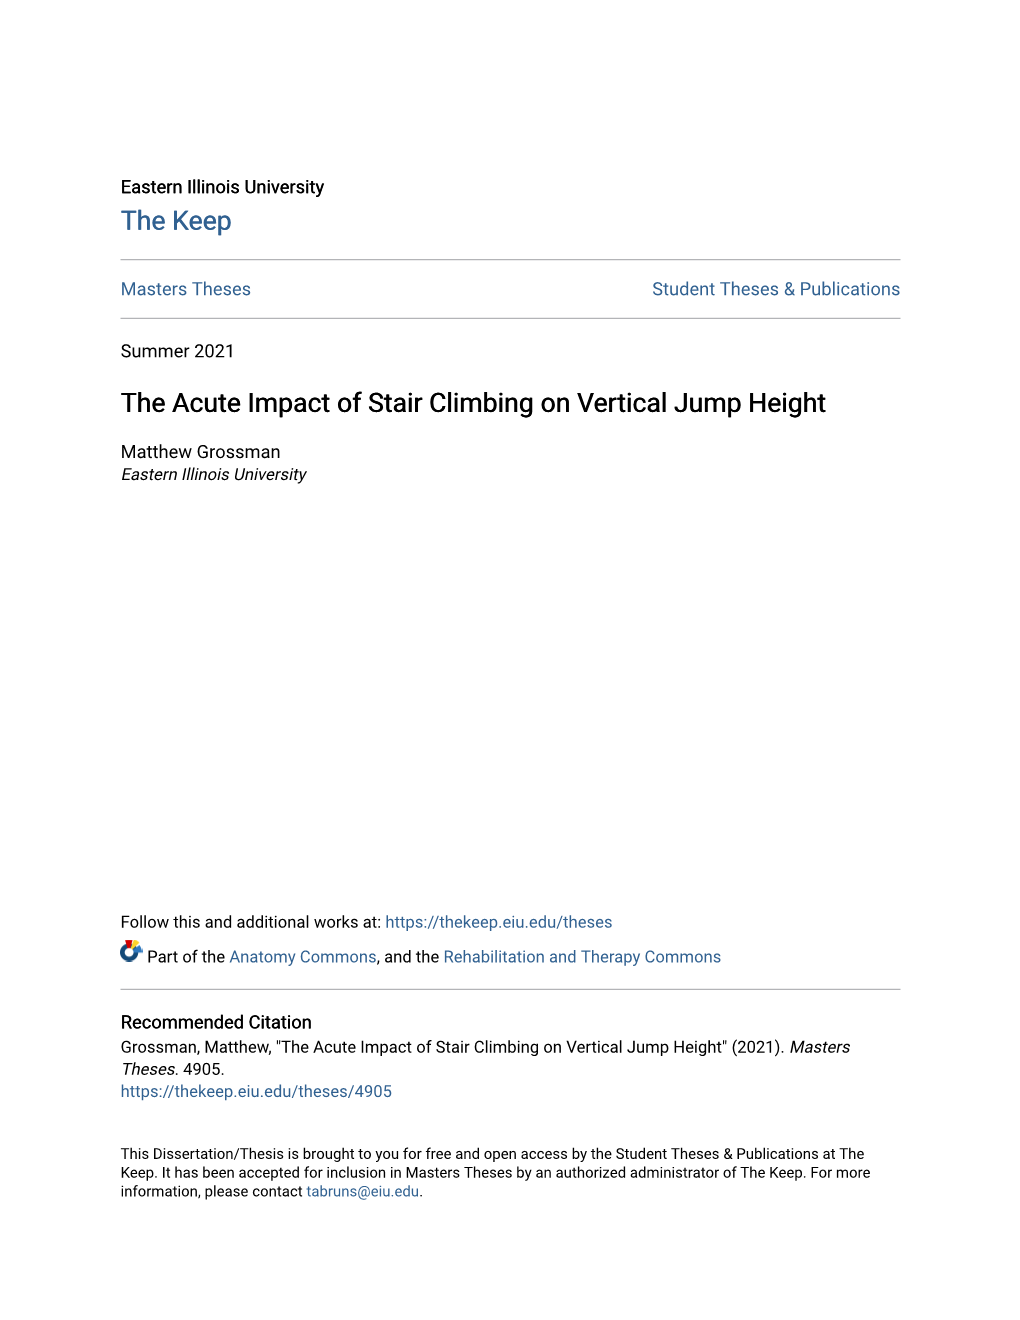 The Acute Impact of Stair Climbing on Vertical Jump Height